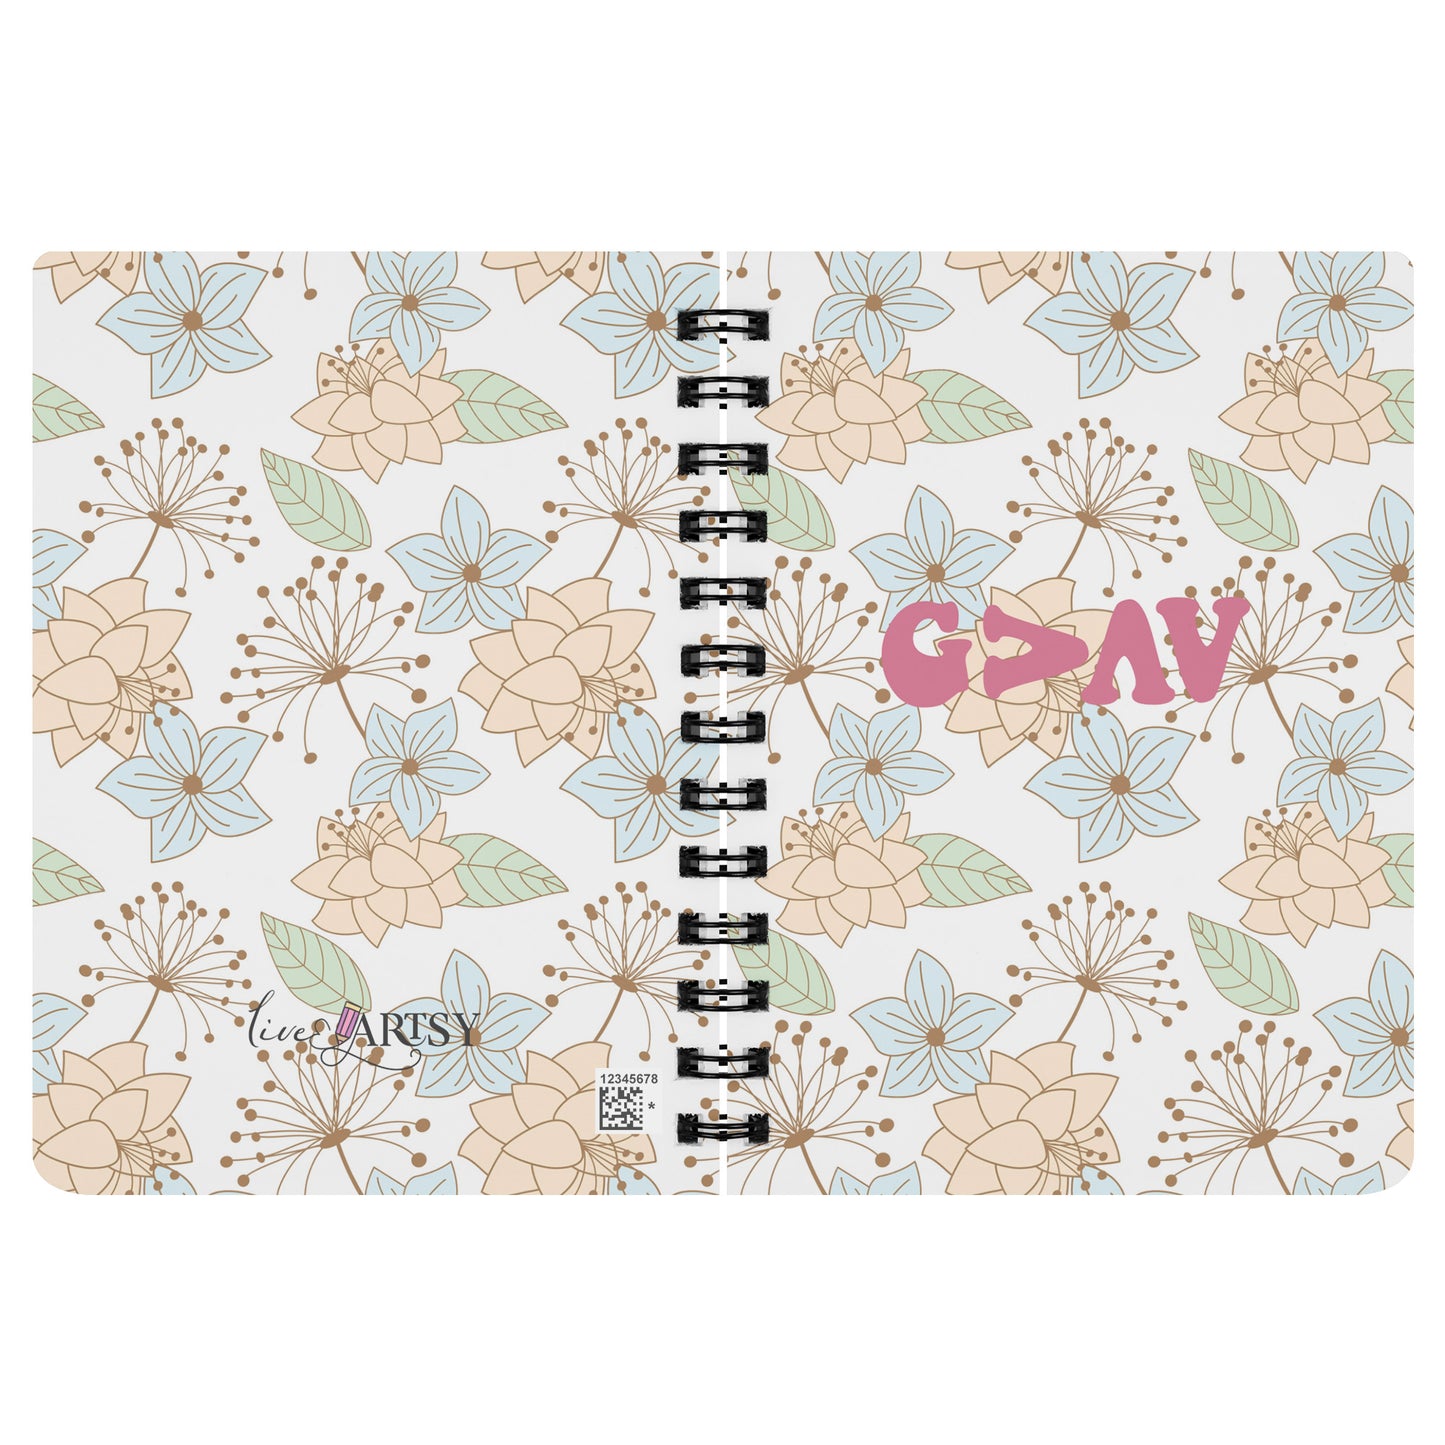 God is Greater Than Our Highs and Lows Spiral Journal Notebook